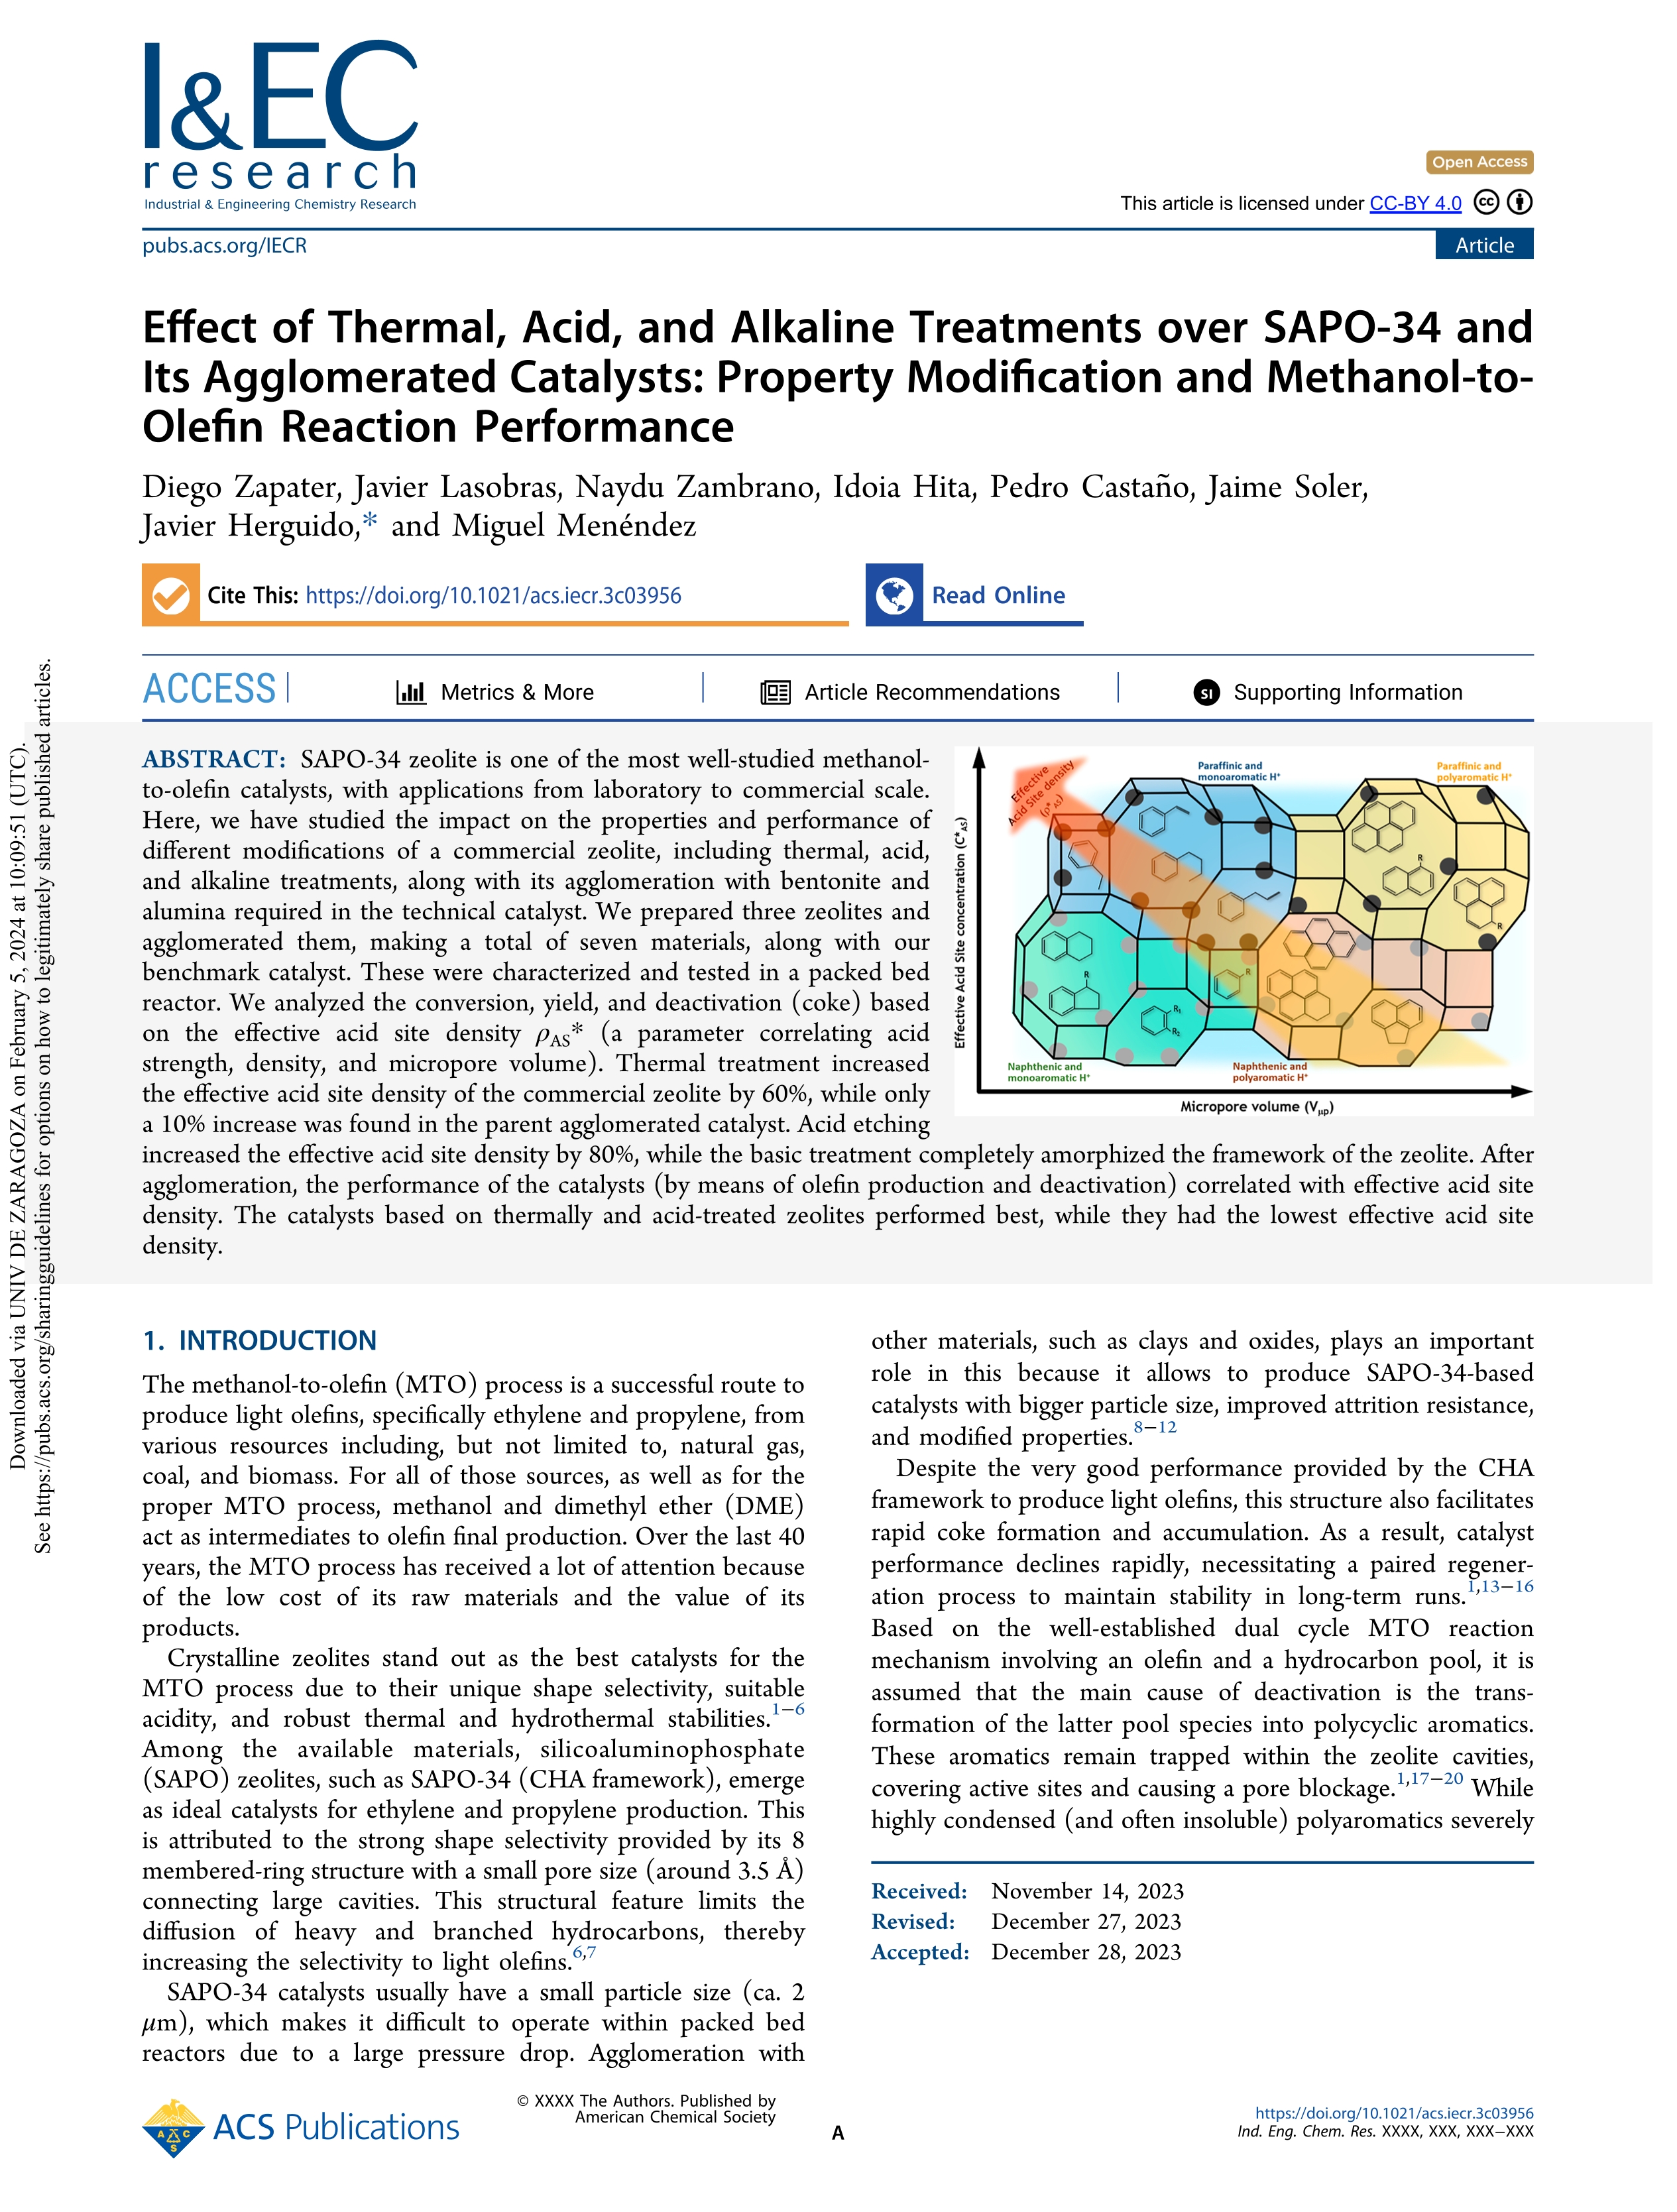 Effect of Thermal, Acid, and Alkaline Treatments over SAPO-34 and Its Agglomerated Catalysts: Property Modification and Methanol-to-Olefin Reaction Performance